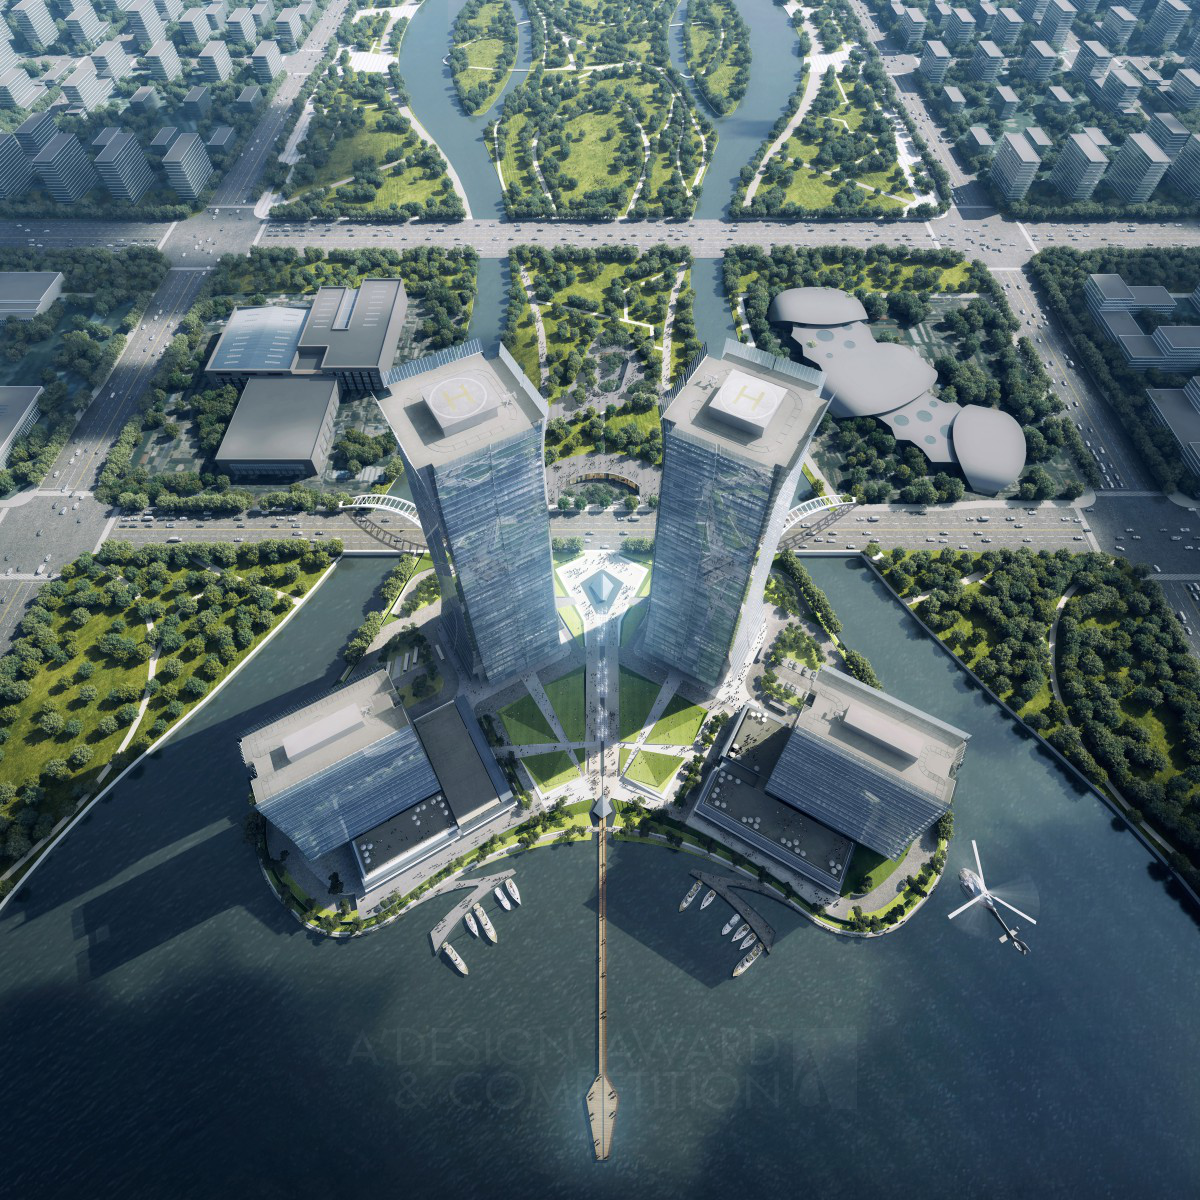 Double-Crane Lake Mixed Use Development by Aedas Golden Architecture, Building and Structure Design Award Winner 2019 